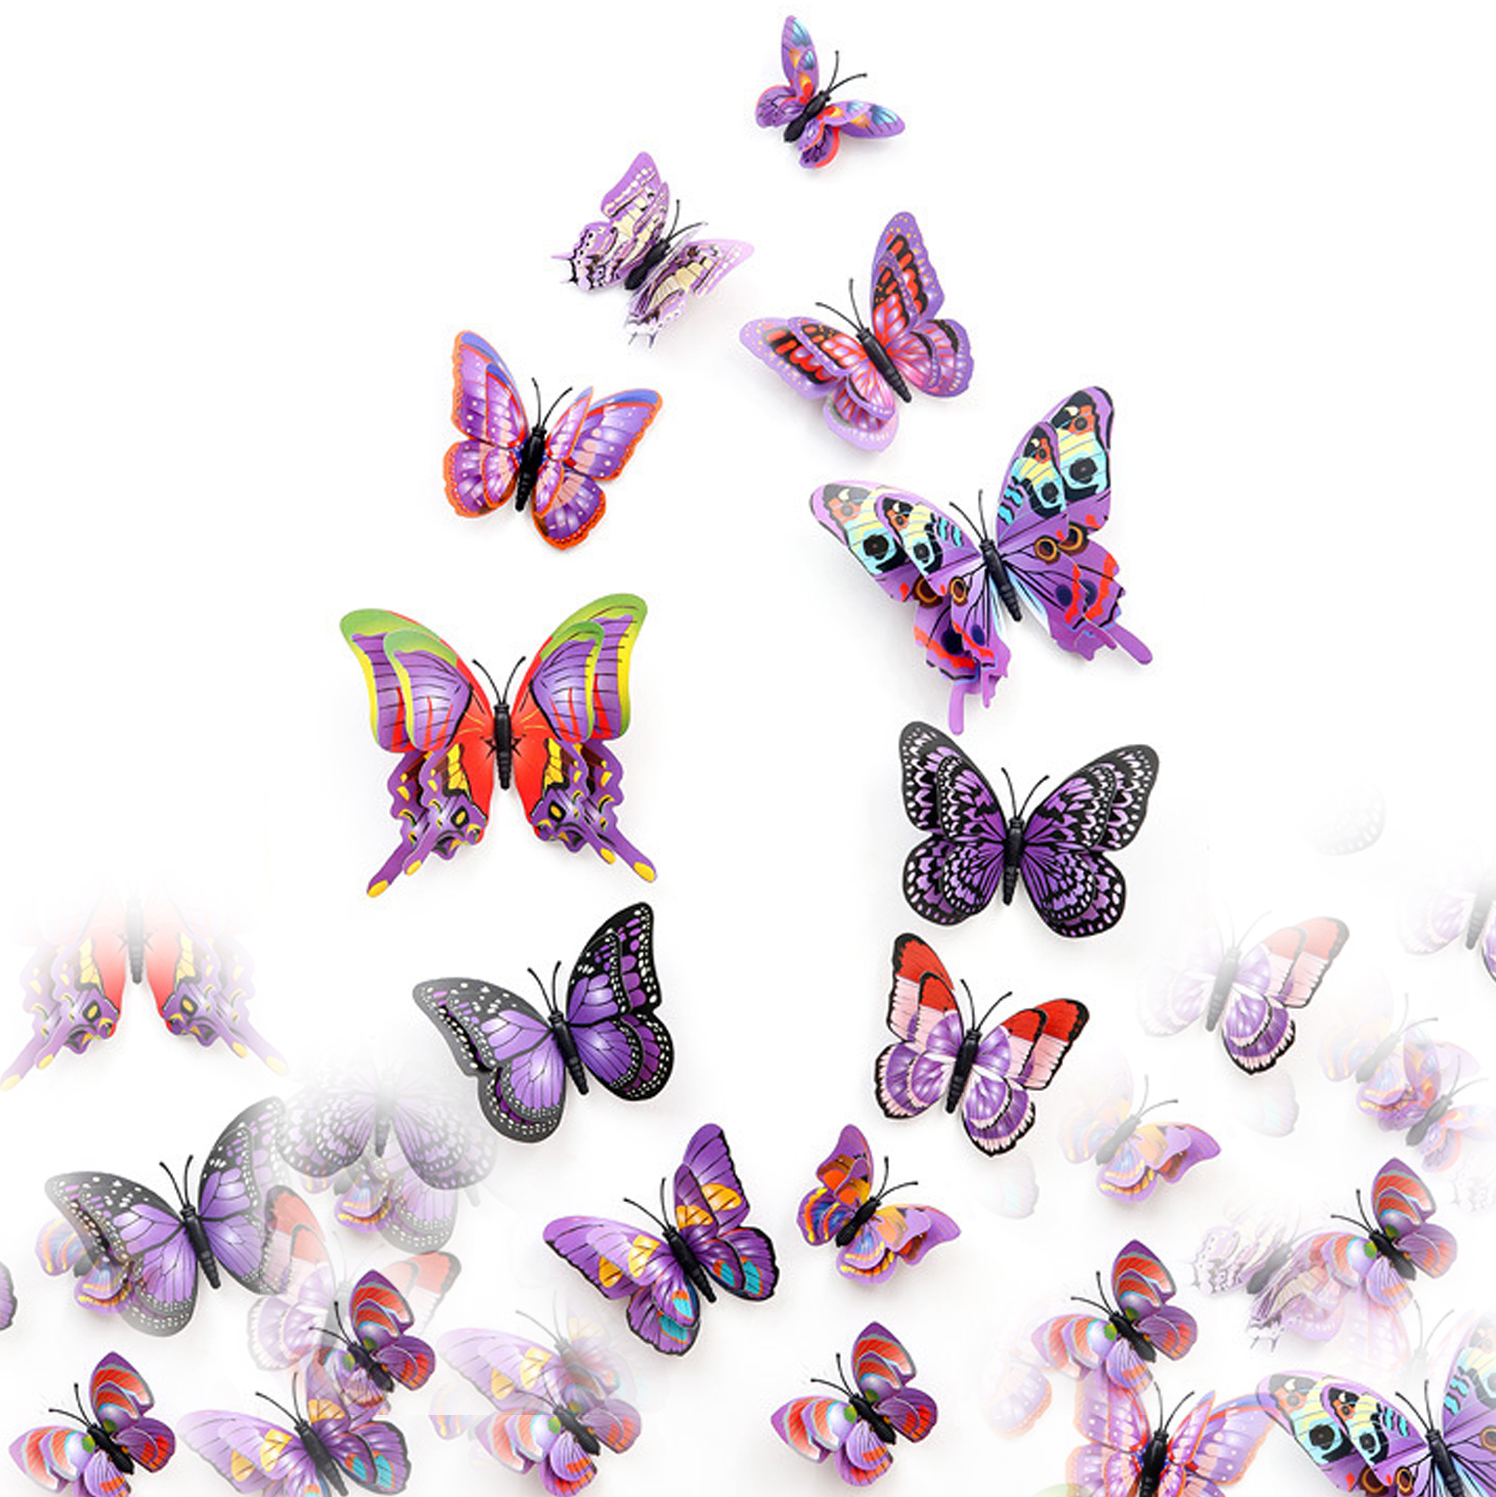 12/24pcs Butterfly Stickers 3D DIY House Wall Decoration Windows Mirror  Girls Room Decor Baby Nursery Decorative Art Decals Wall Sticker Double  Wings Vivid Design By Lisdripe